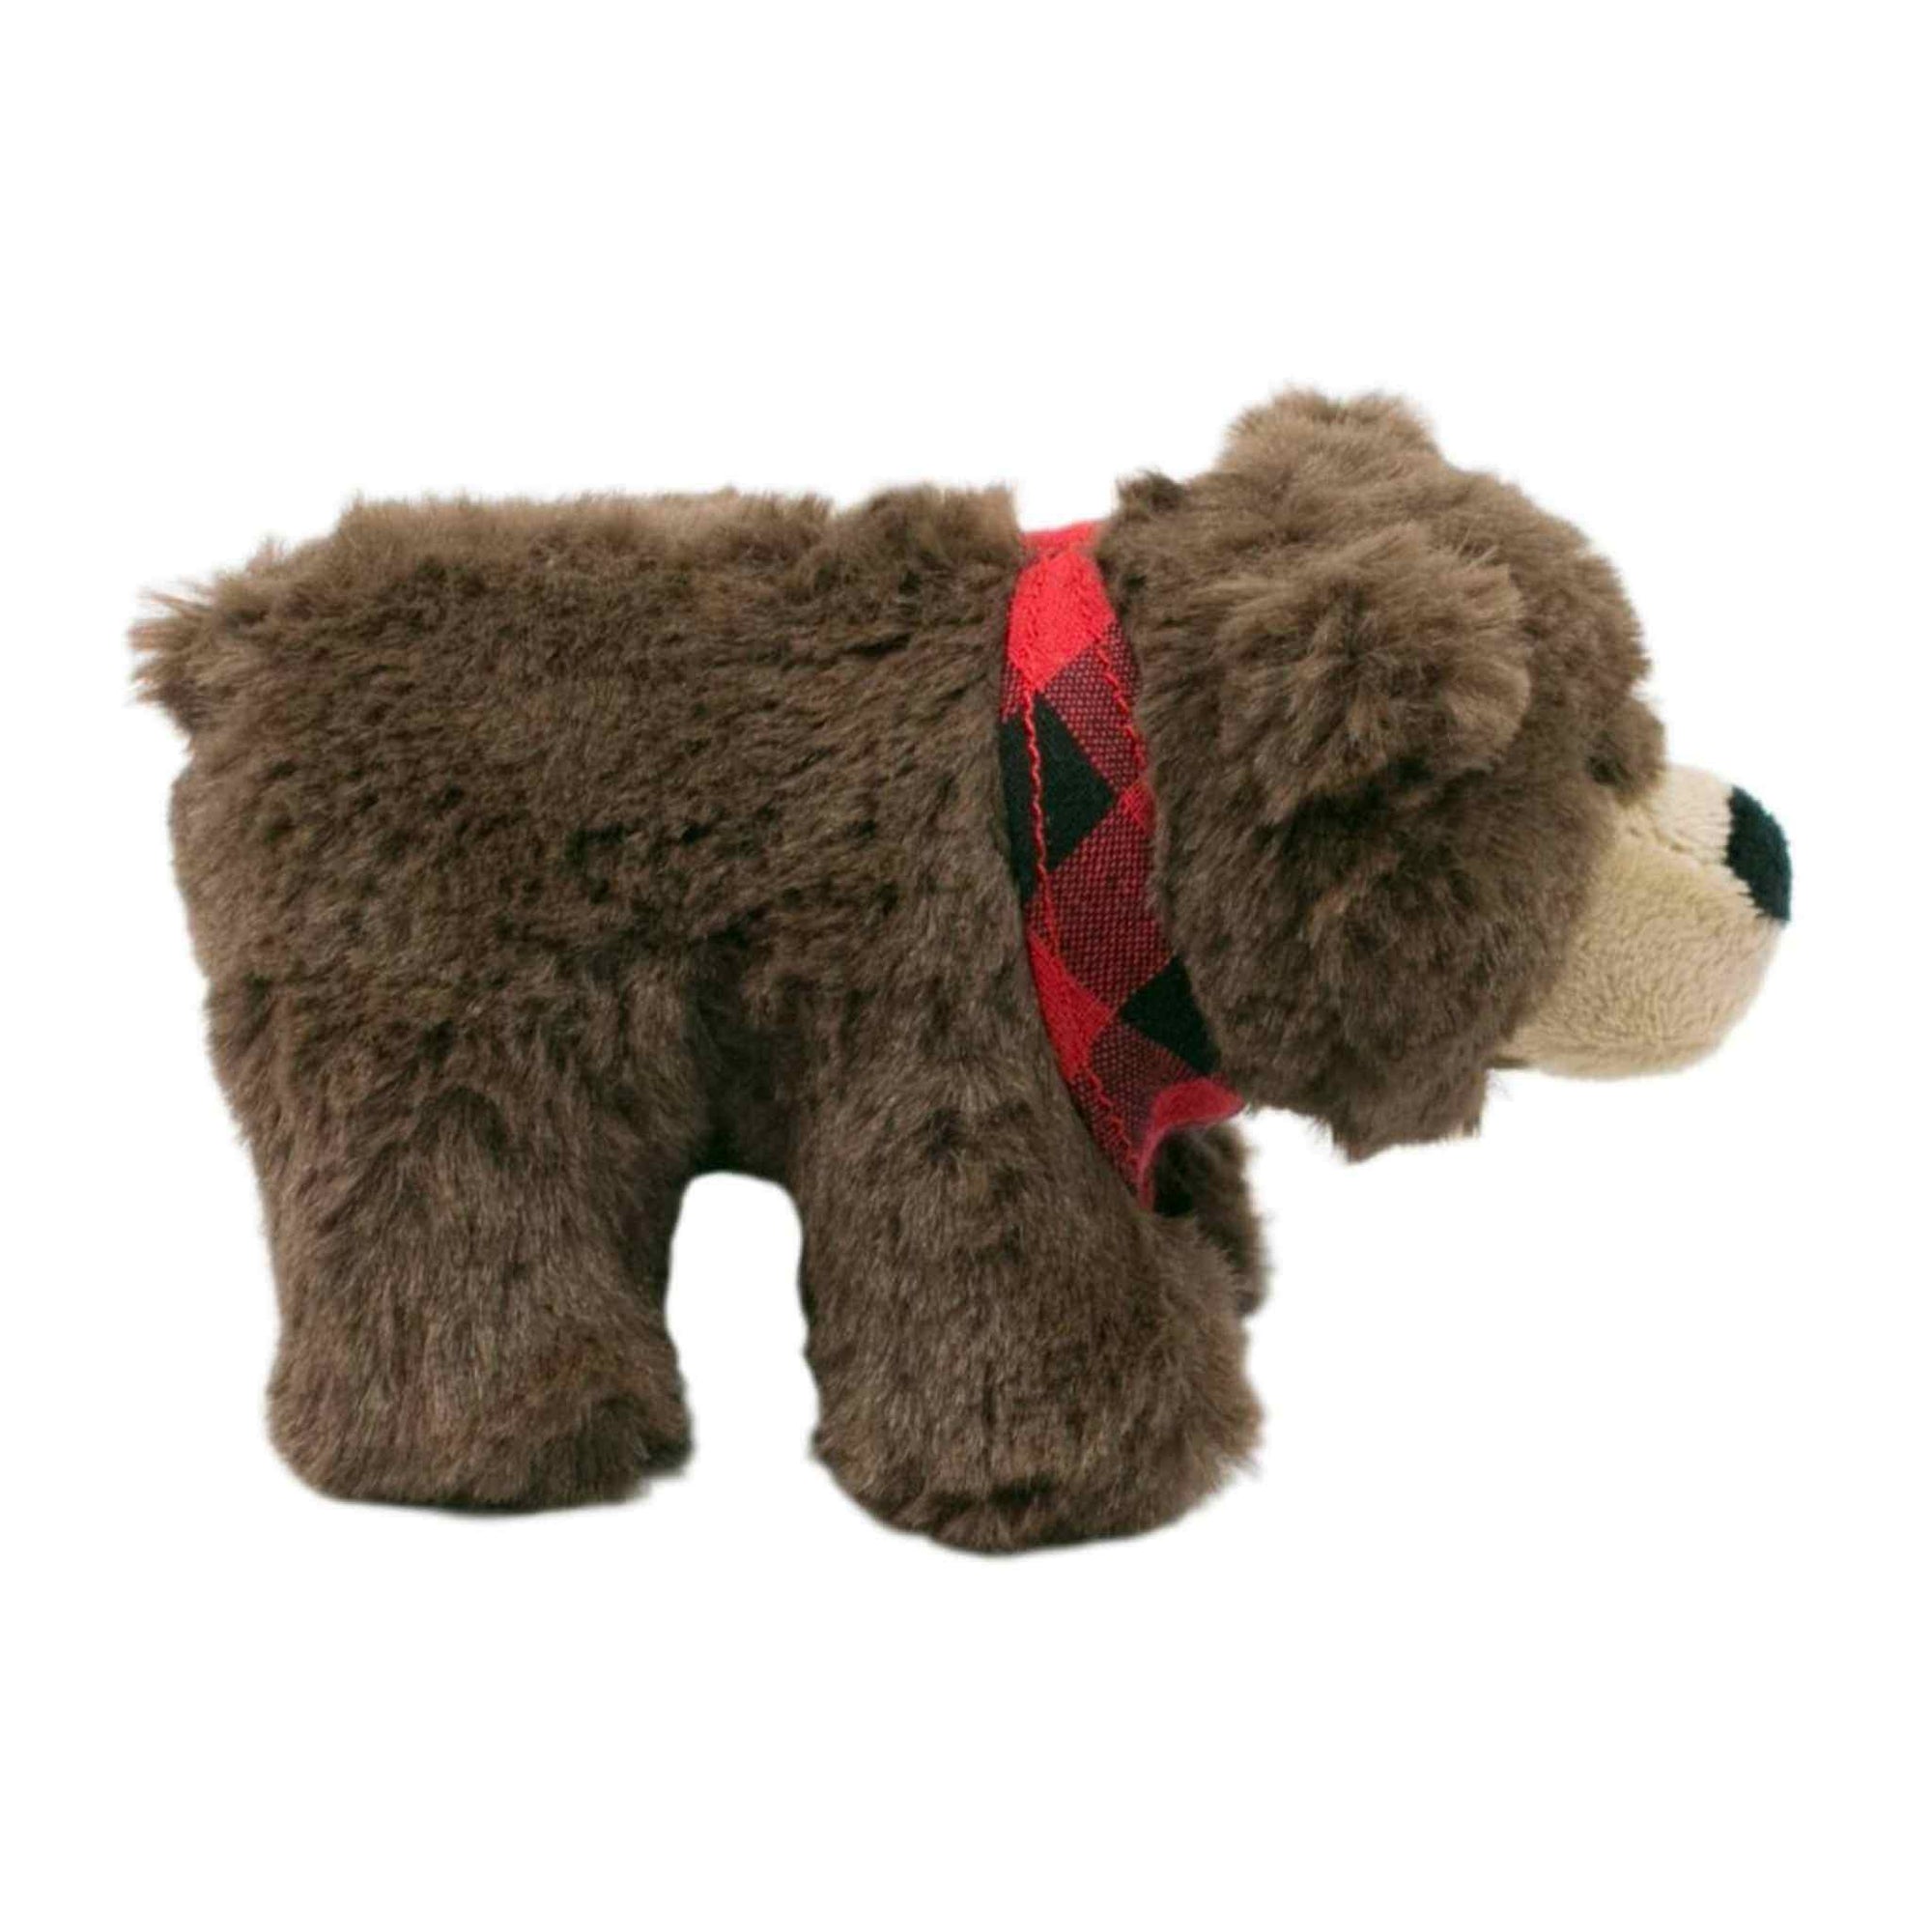 Tall Tails Plush Bear Small Dog Toy - Side View